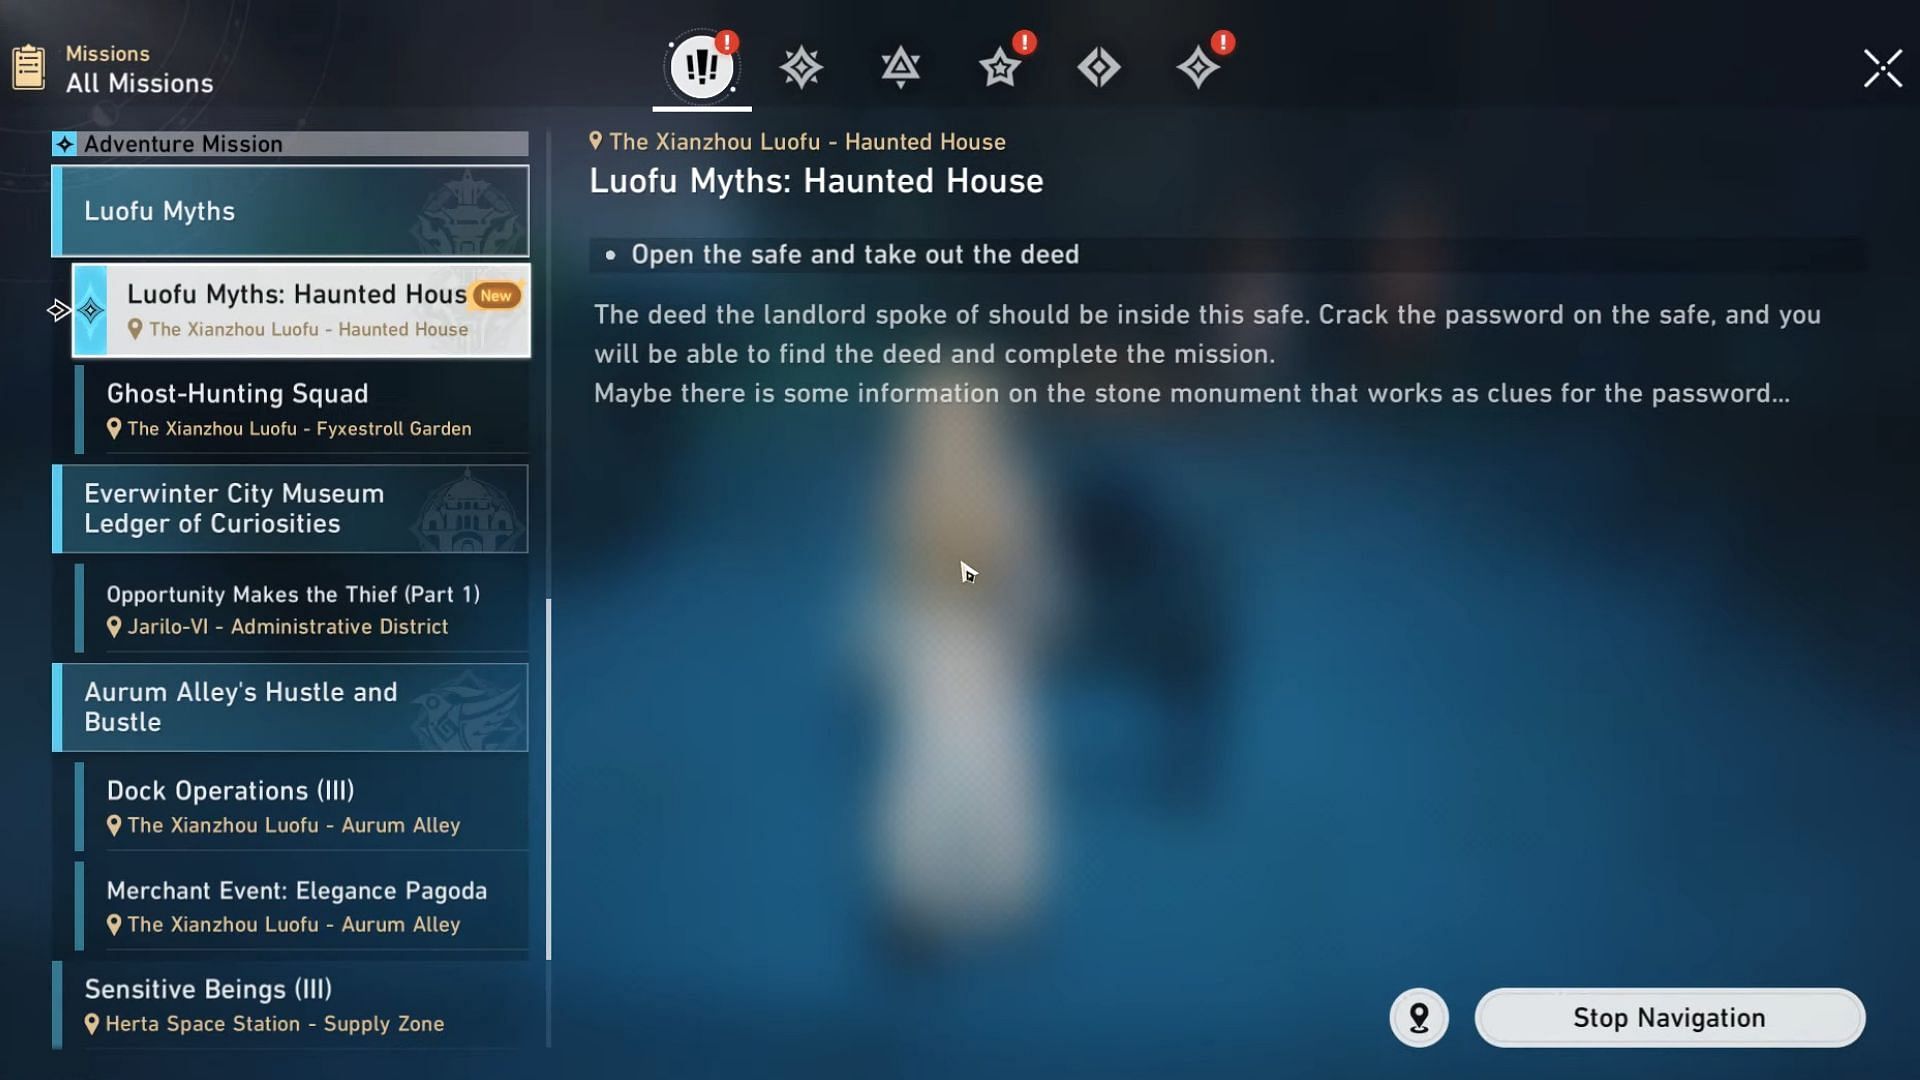 Image showing the Luofu Myths: Haunted House mission